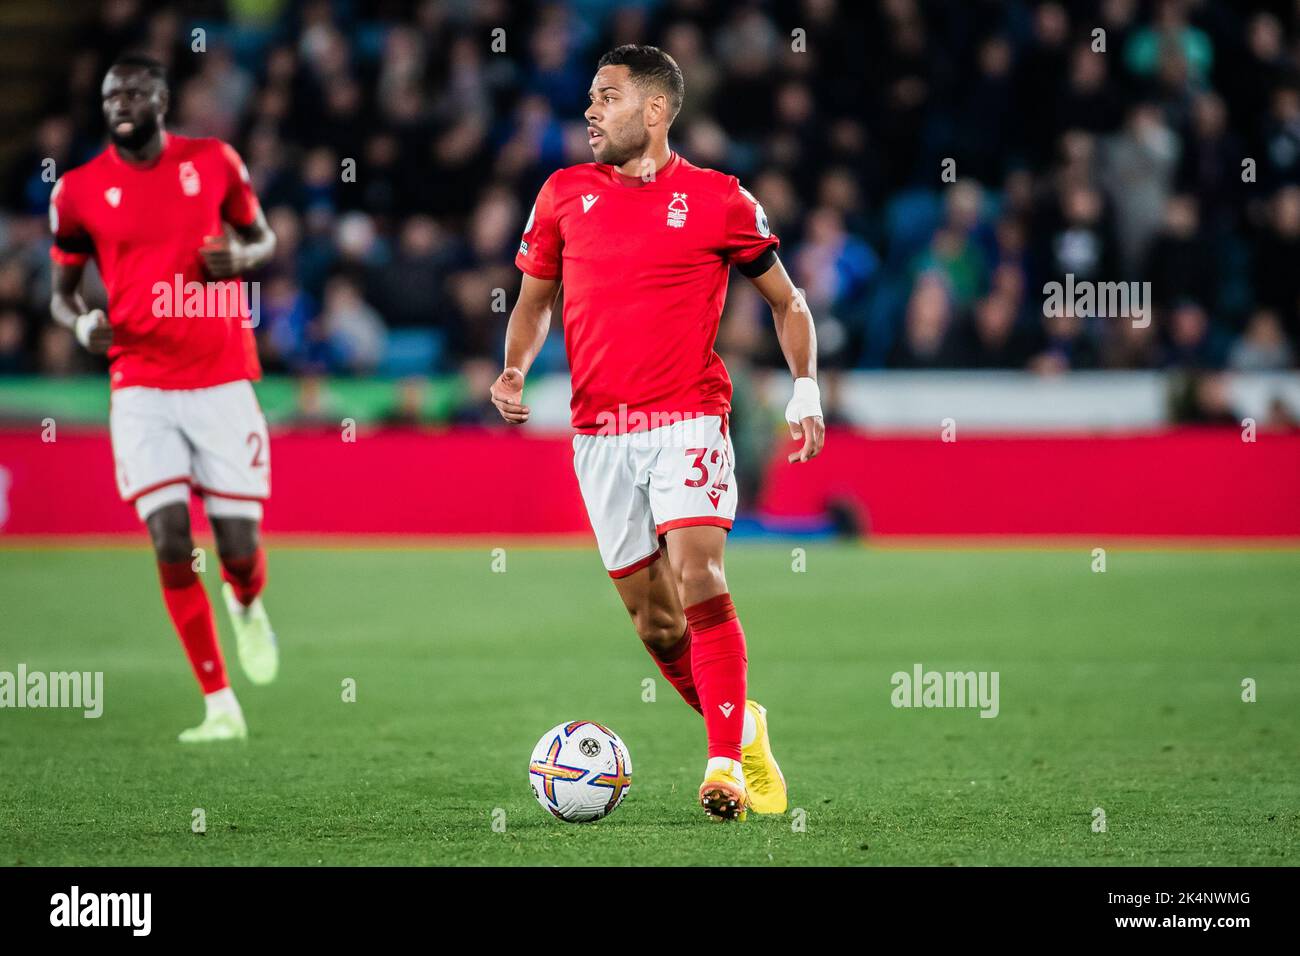 Renan Lodi #32 of Nottingham Forest looks for options during the Premier League match Leicester City vs Nottingham Forest at King Power Stadium, Leicester, United Kingdom, 3rd October 2022  (Photo by Ritchie Sumpter/News Images) Stock Photo